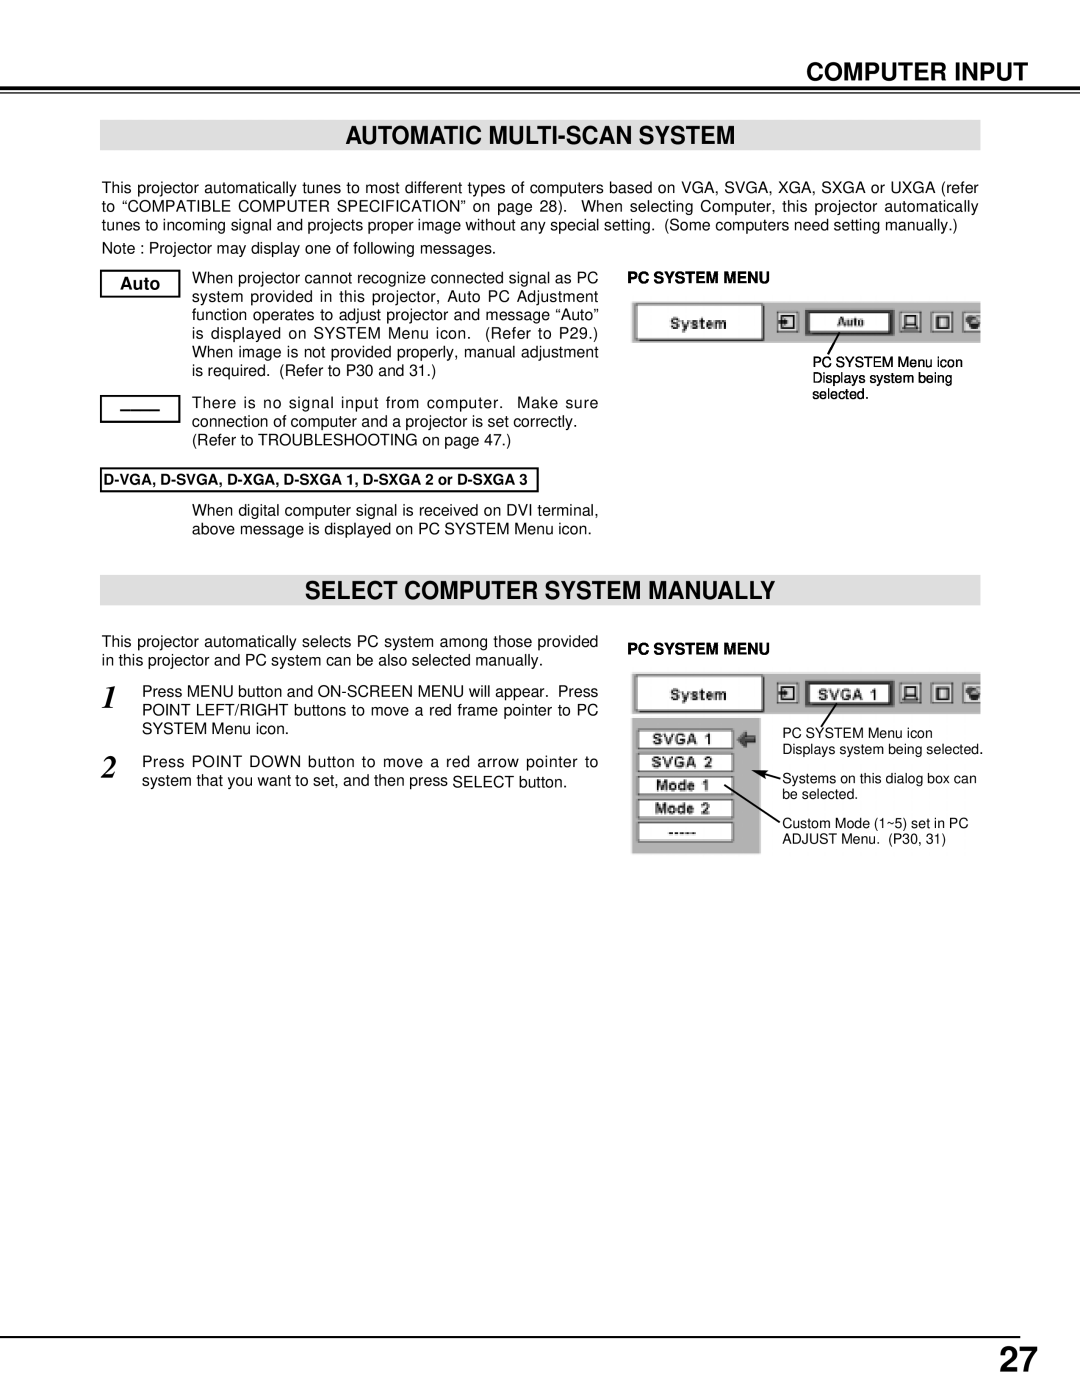 Eiki LC-XT2 instruction manual Computer Input Automatic Multi-Scansystem, Select Computer System Manually 